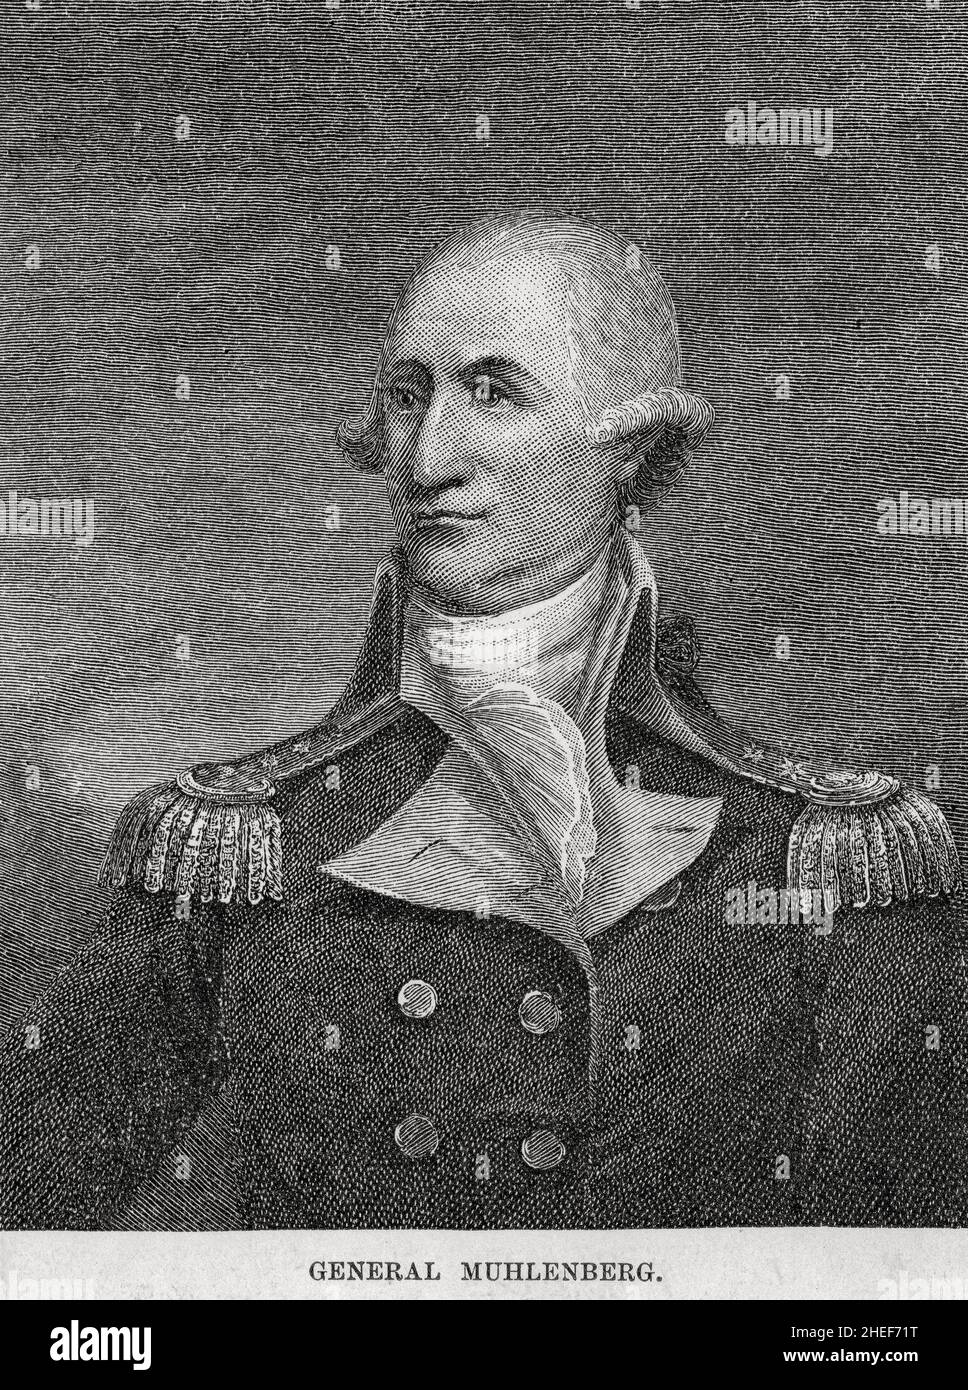 General Muhlenberg during the American Revolution - John Peter Gabriel Muhlenberg (October 1, 1746 – October 1, 1807) was an American clergyman, Continental Army soldier during the American Revolutionary War Stock Photo